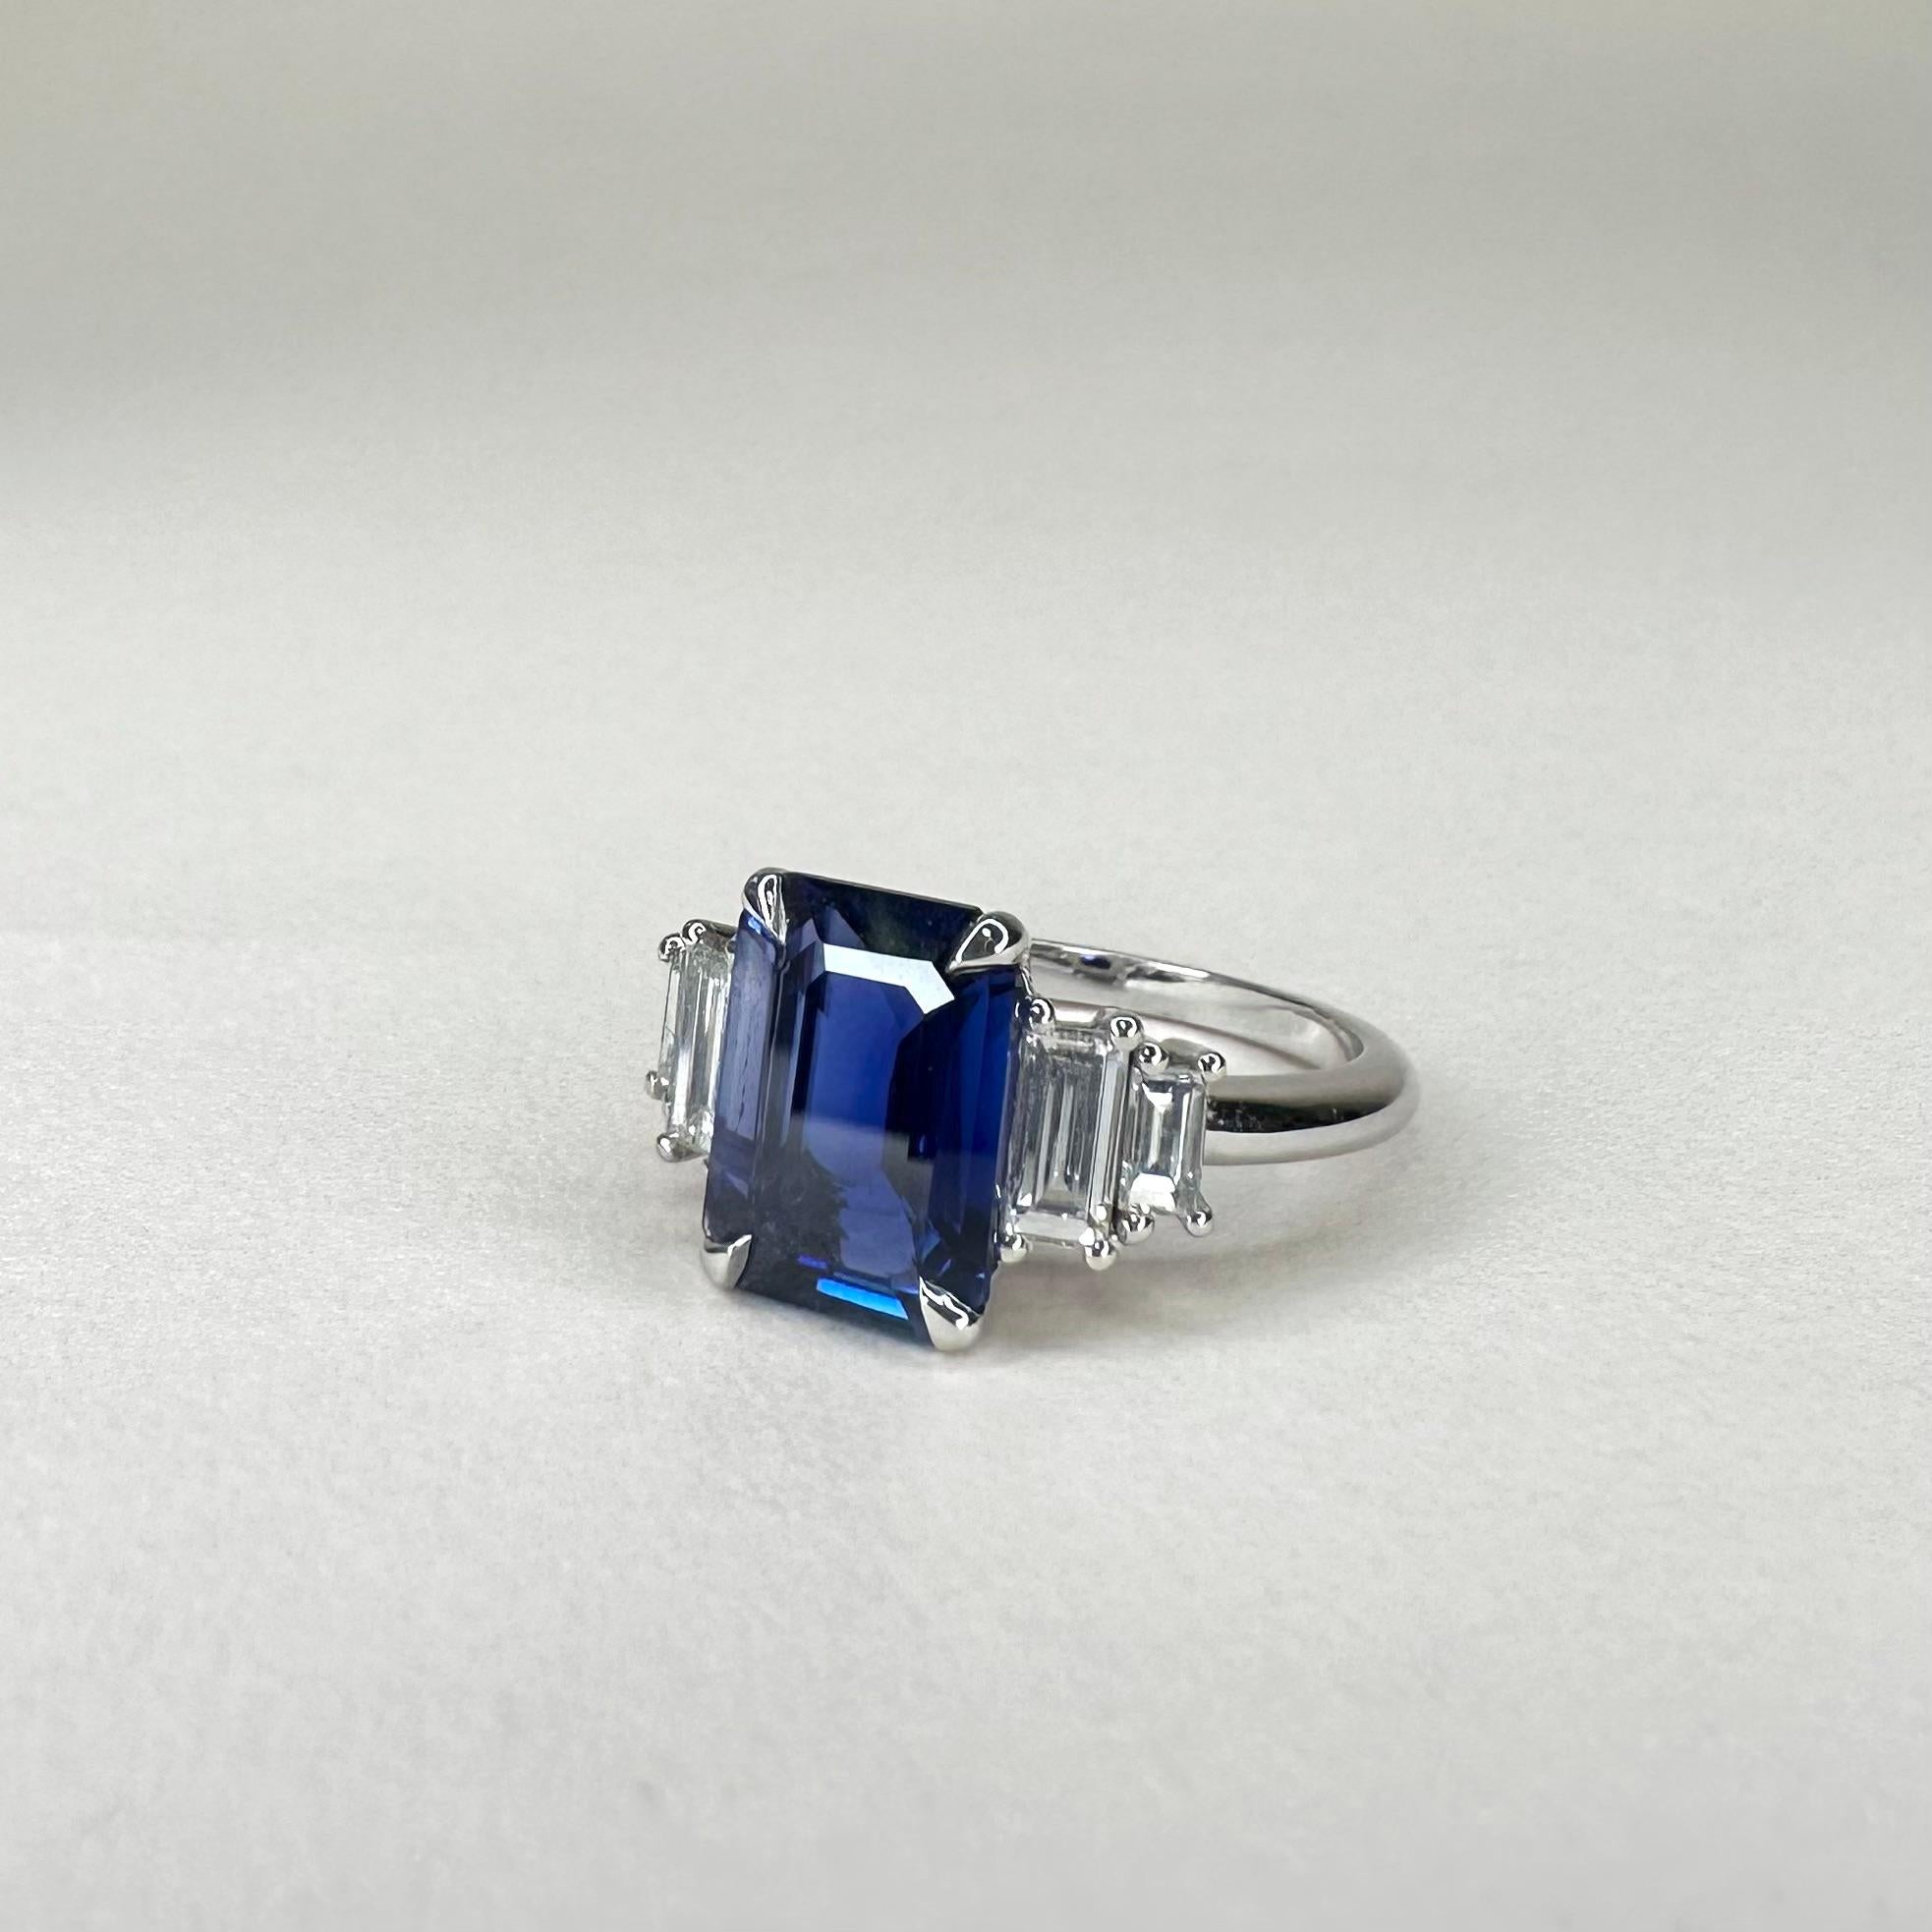 For Sale:  Art Deco Style 18k White Gold Ring With 2.65 Ct Royal Blue Emerald Cut Sapphire 3